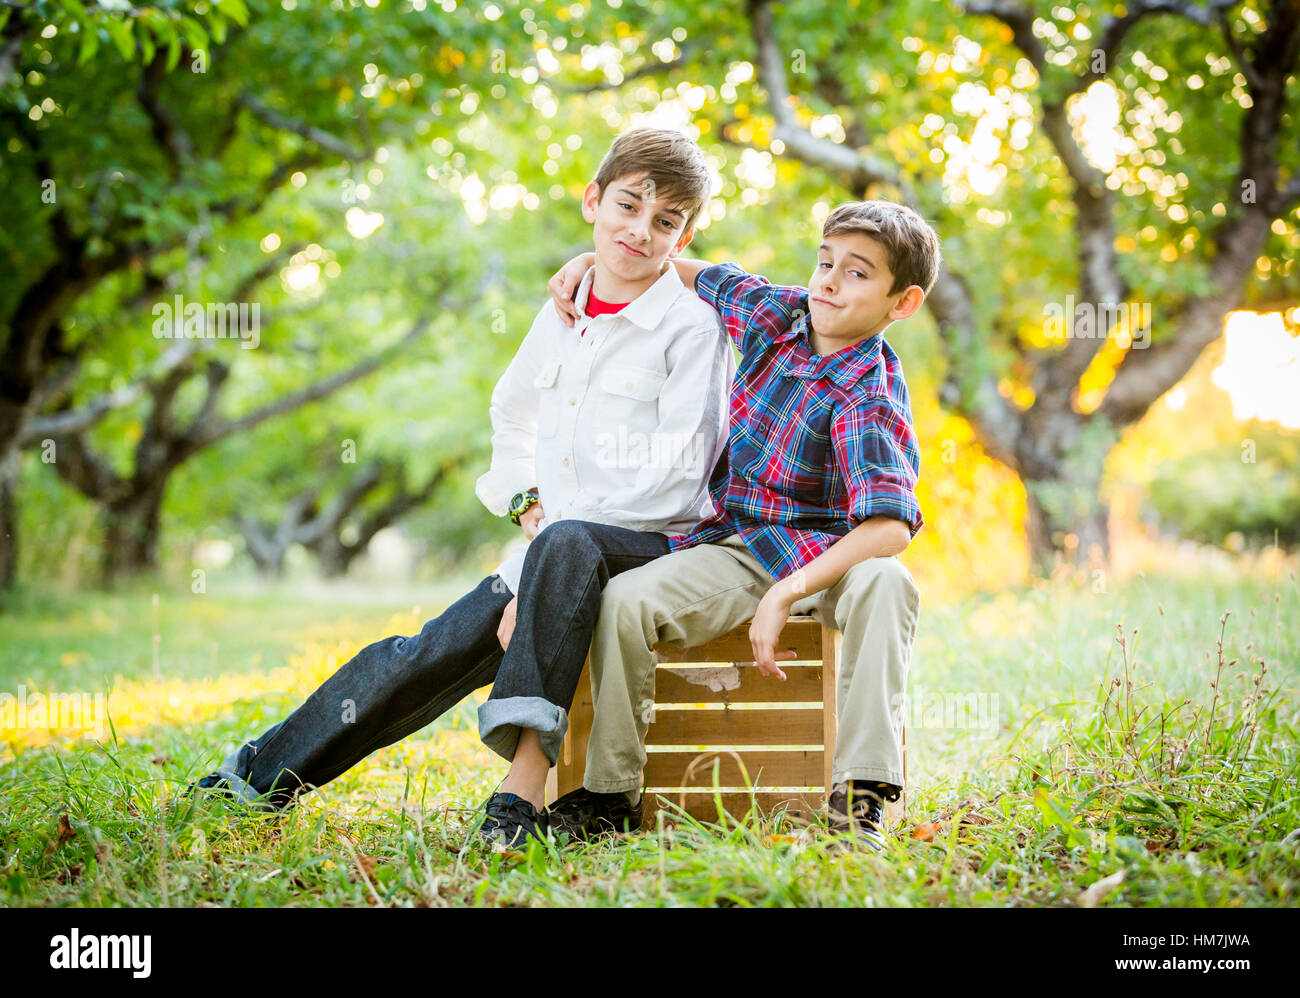 Smiling brothers embracing in Cherry Orchard Banque D'Images